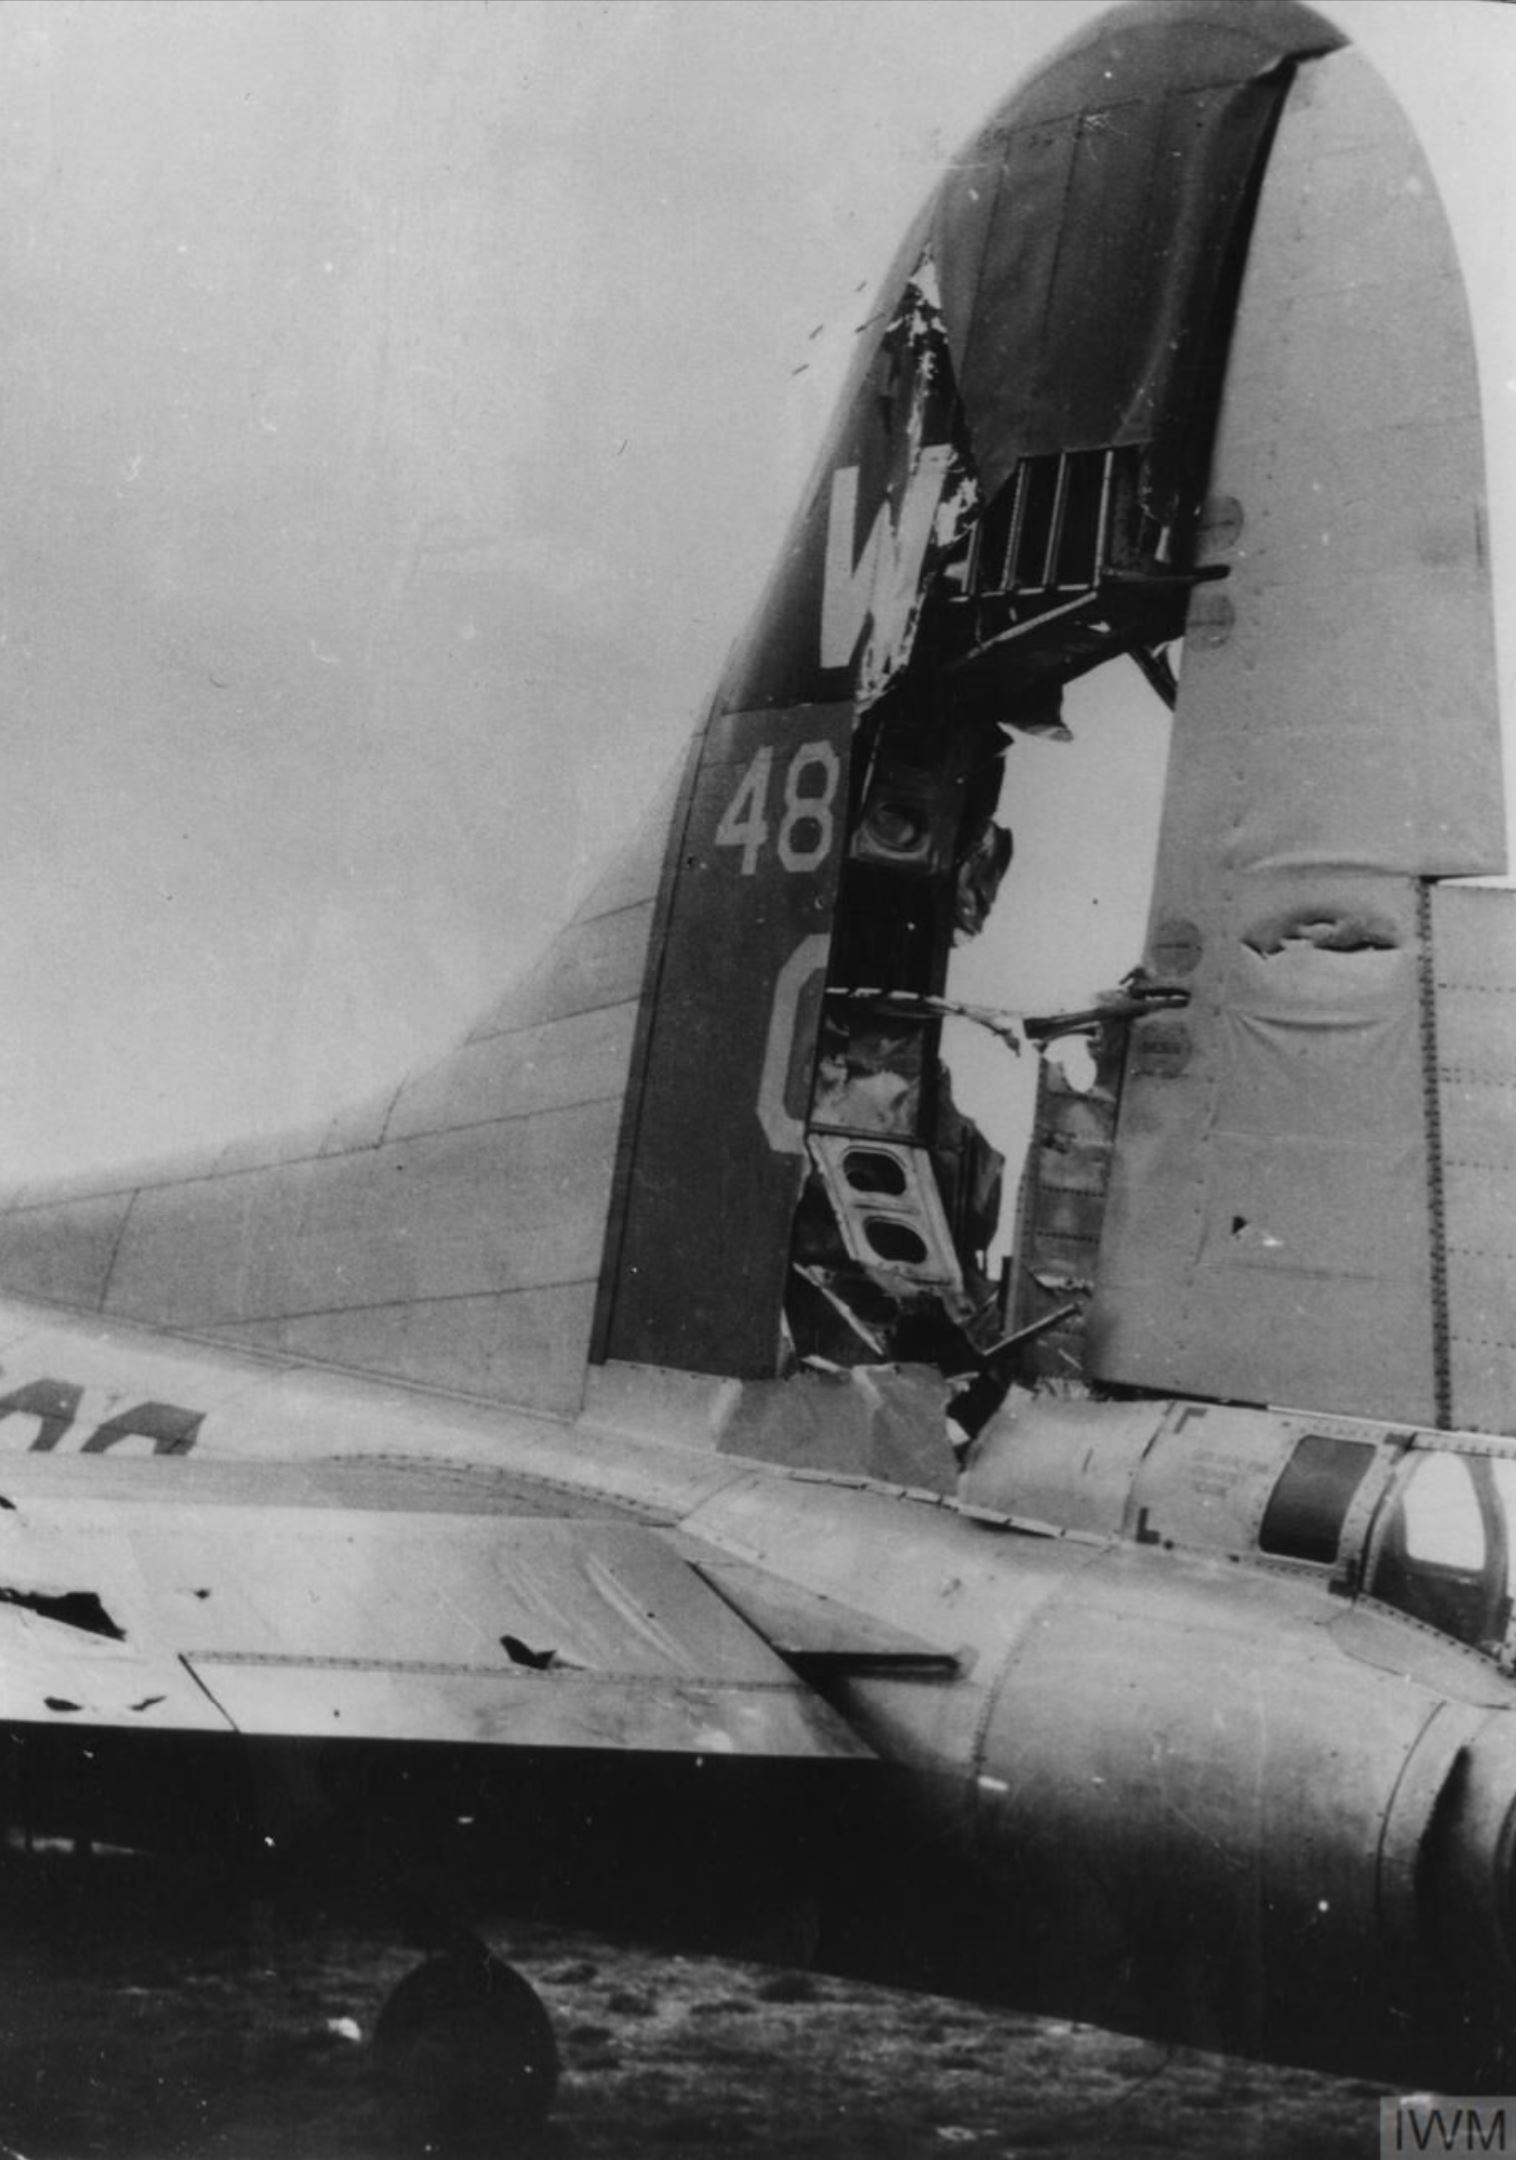 44 8699 B 17G Fortress 8AF 398BG600BS N8Q suffered tails damage by a Me 262 R4M rocket on 10th Apr 1945 FRE8069